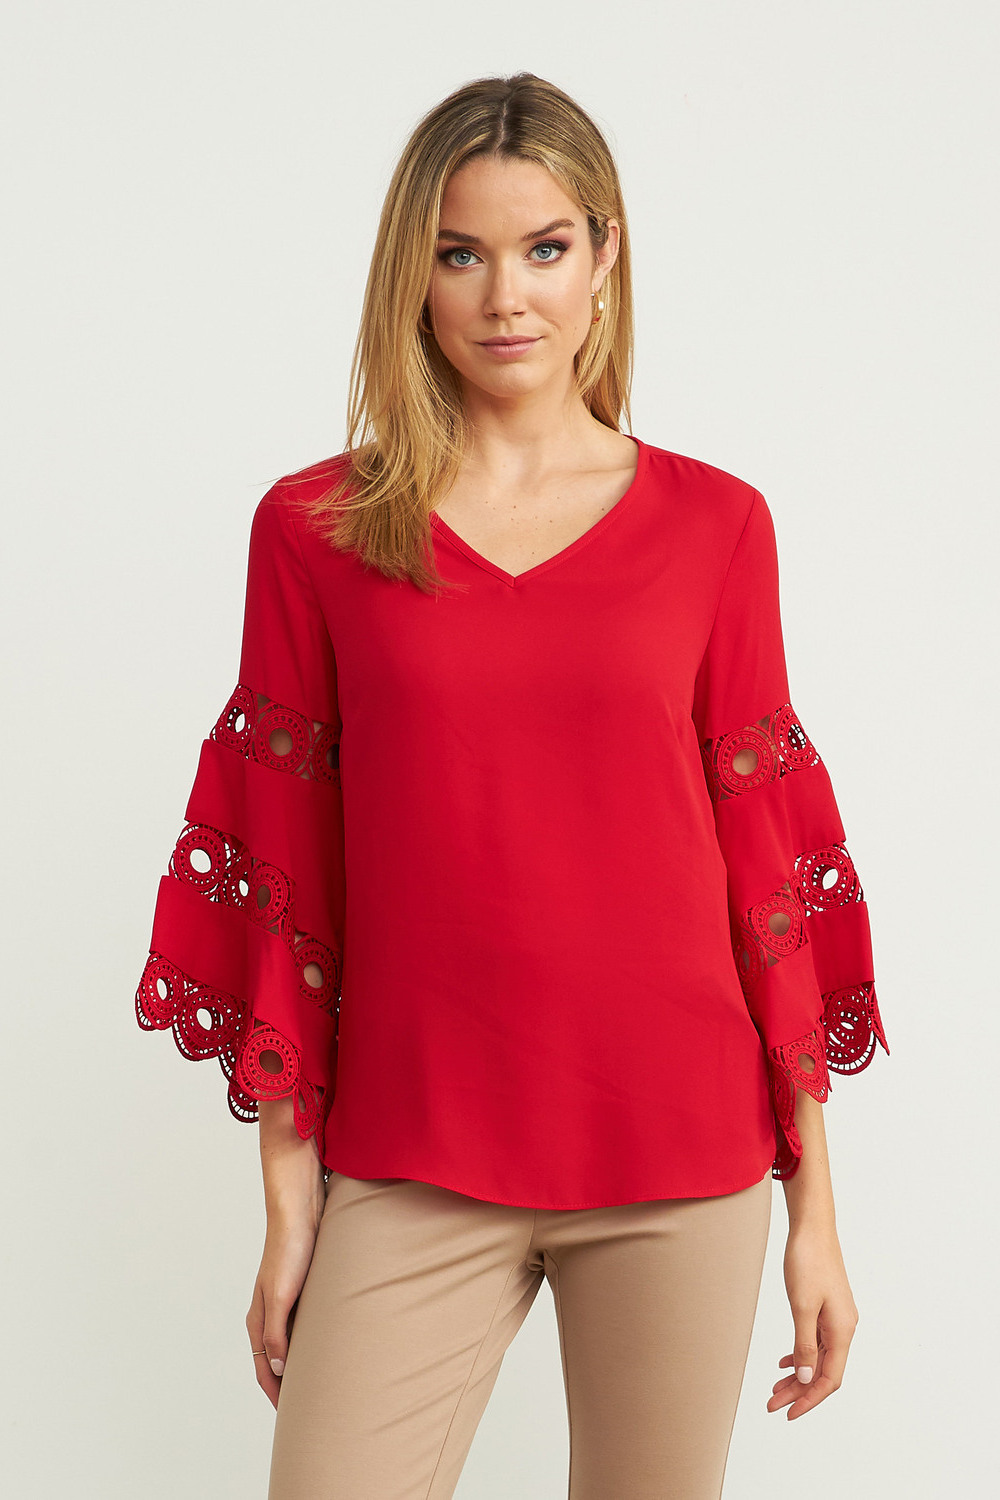 Joseph Ribkoff Cut-Out Sleeve Blouse Style 203441. Lipstick Red 173